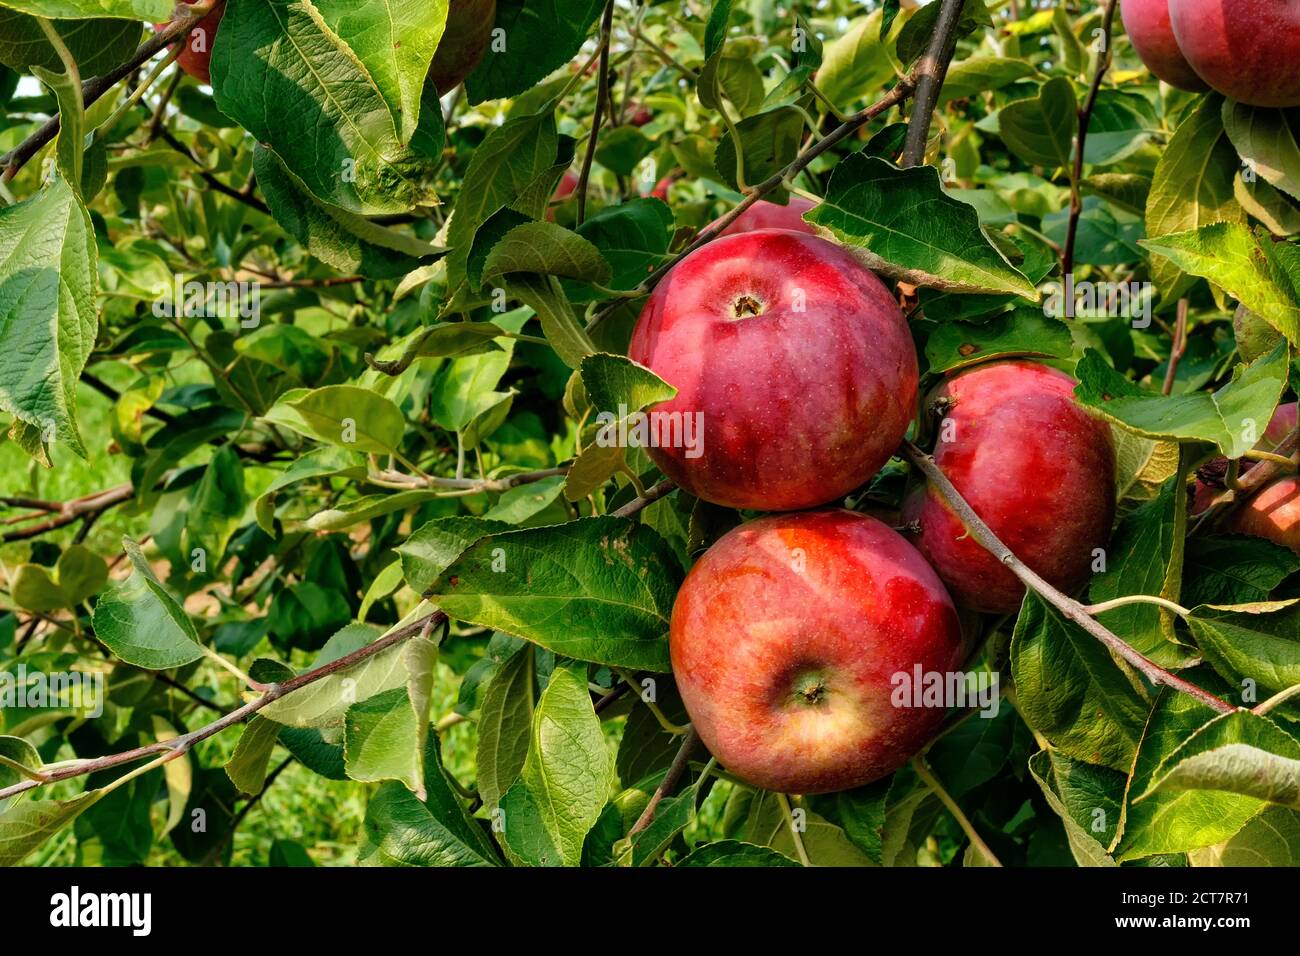 Red Cort Apples on tree Stock Photo